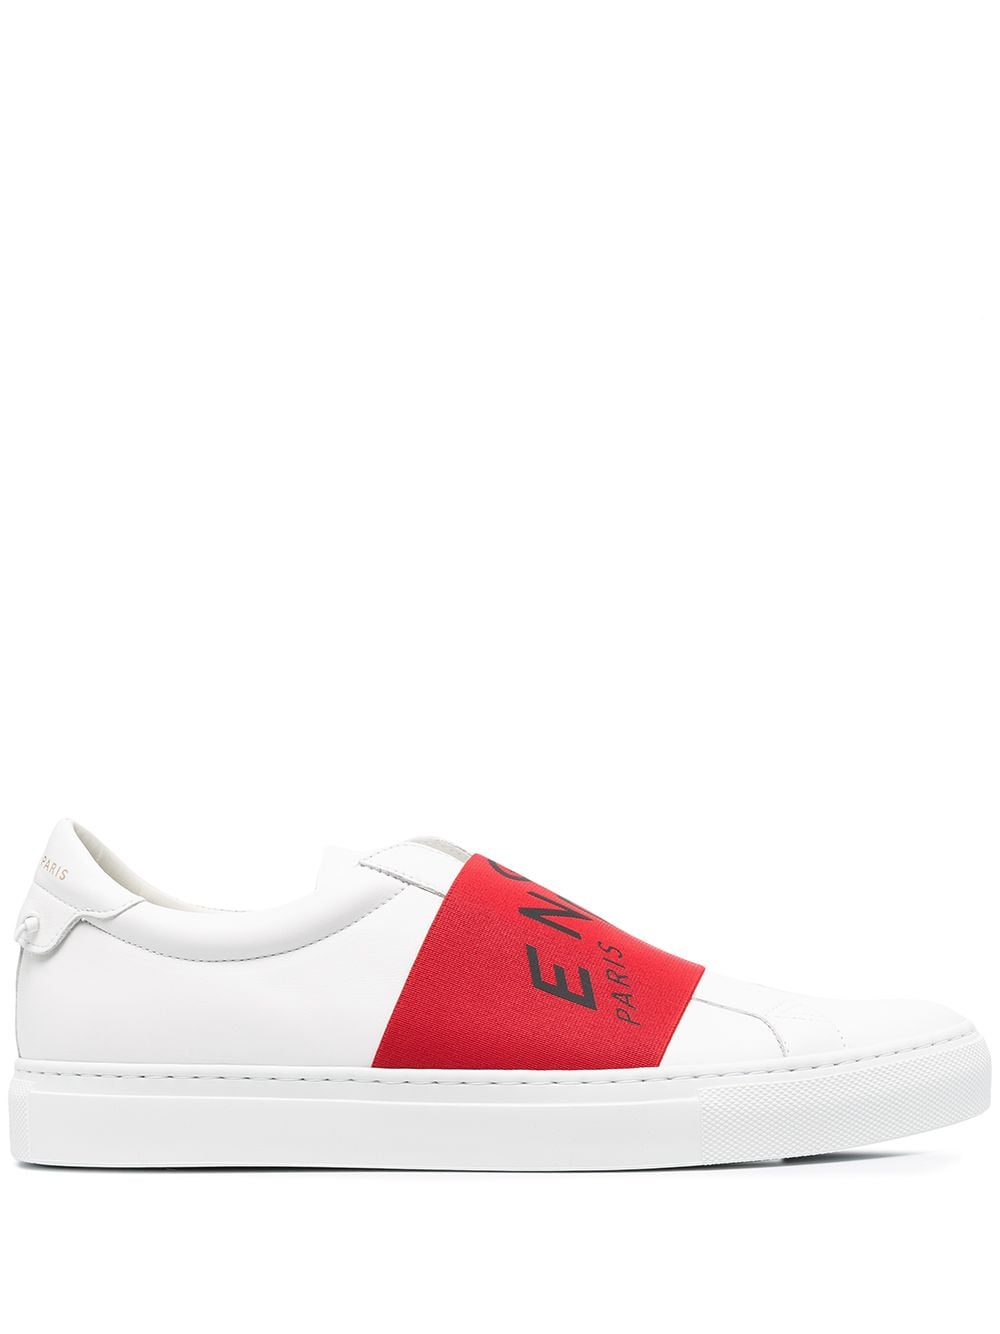 Givenchy Urban Street low-top Sneakers - Farfetch